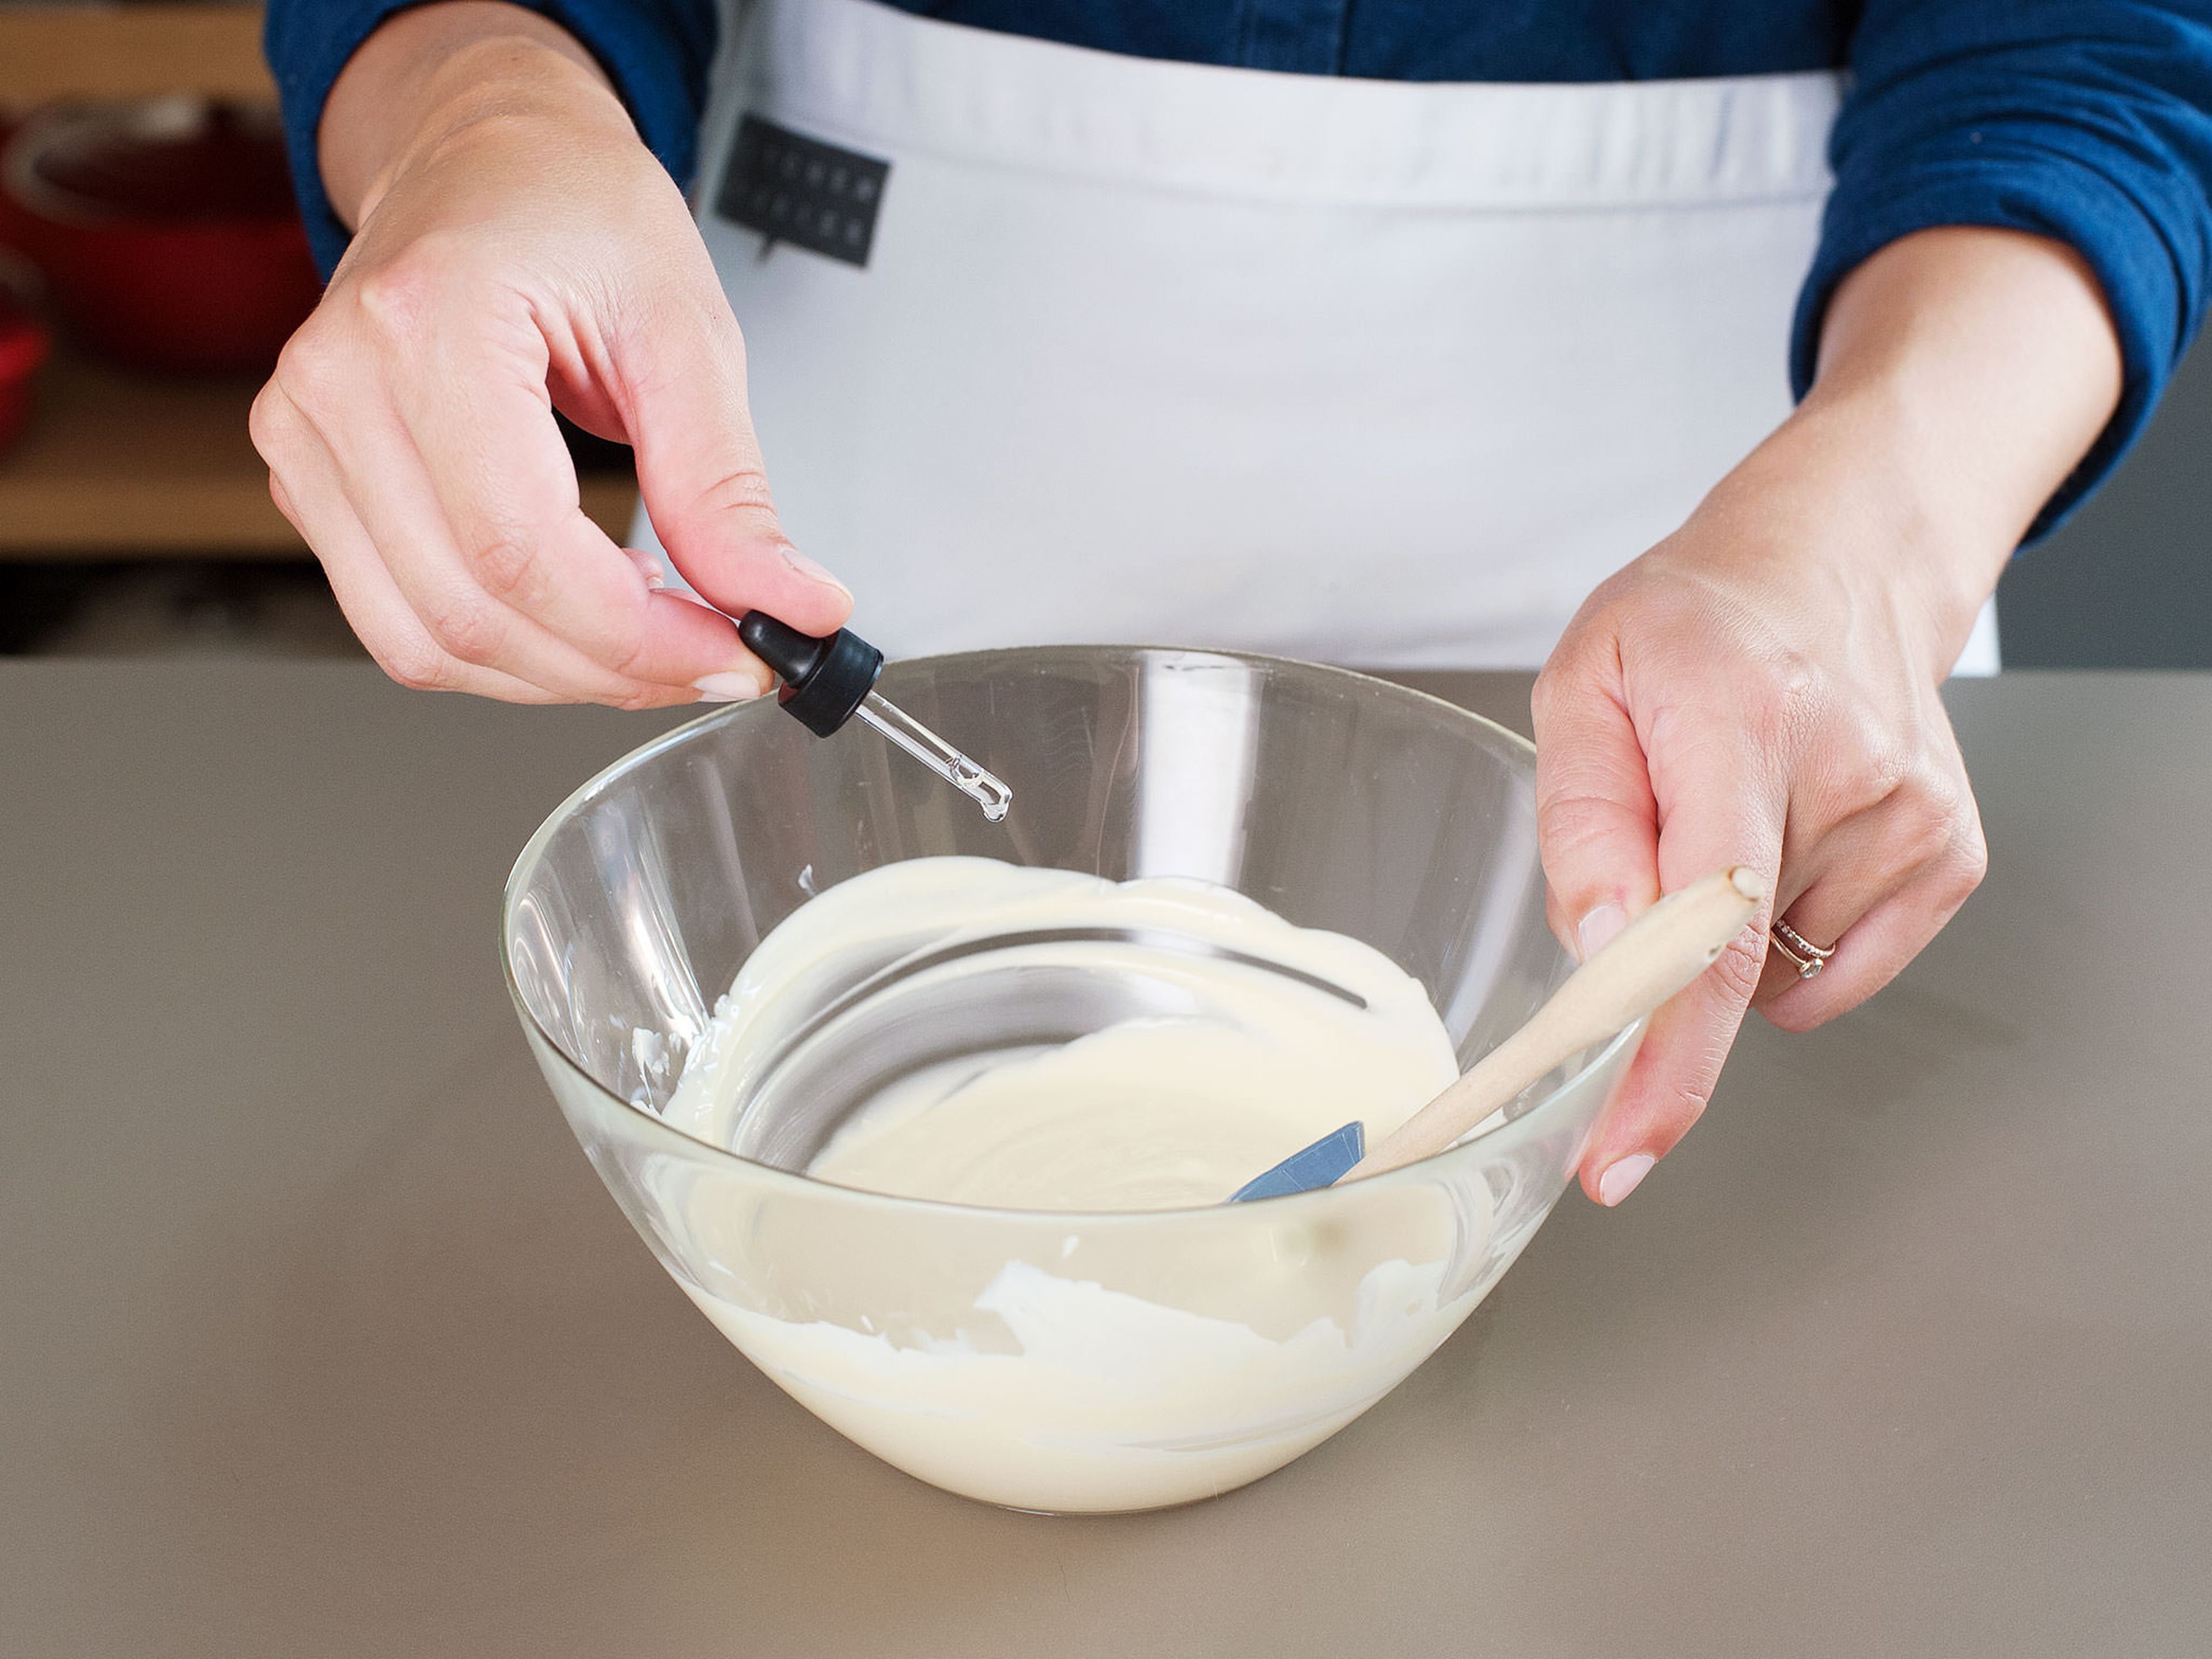 In a clean heatproof bowl, melt white chocolate over the saucepan of simmering water.  Remove from heat and stir in peppermint extract.